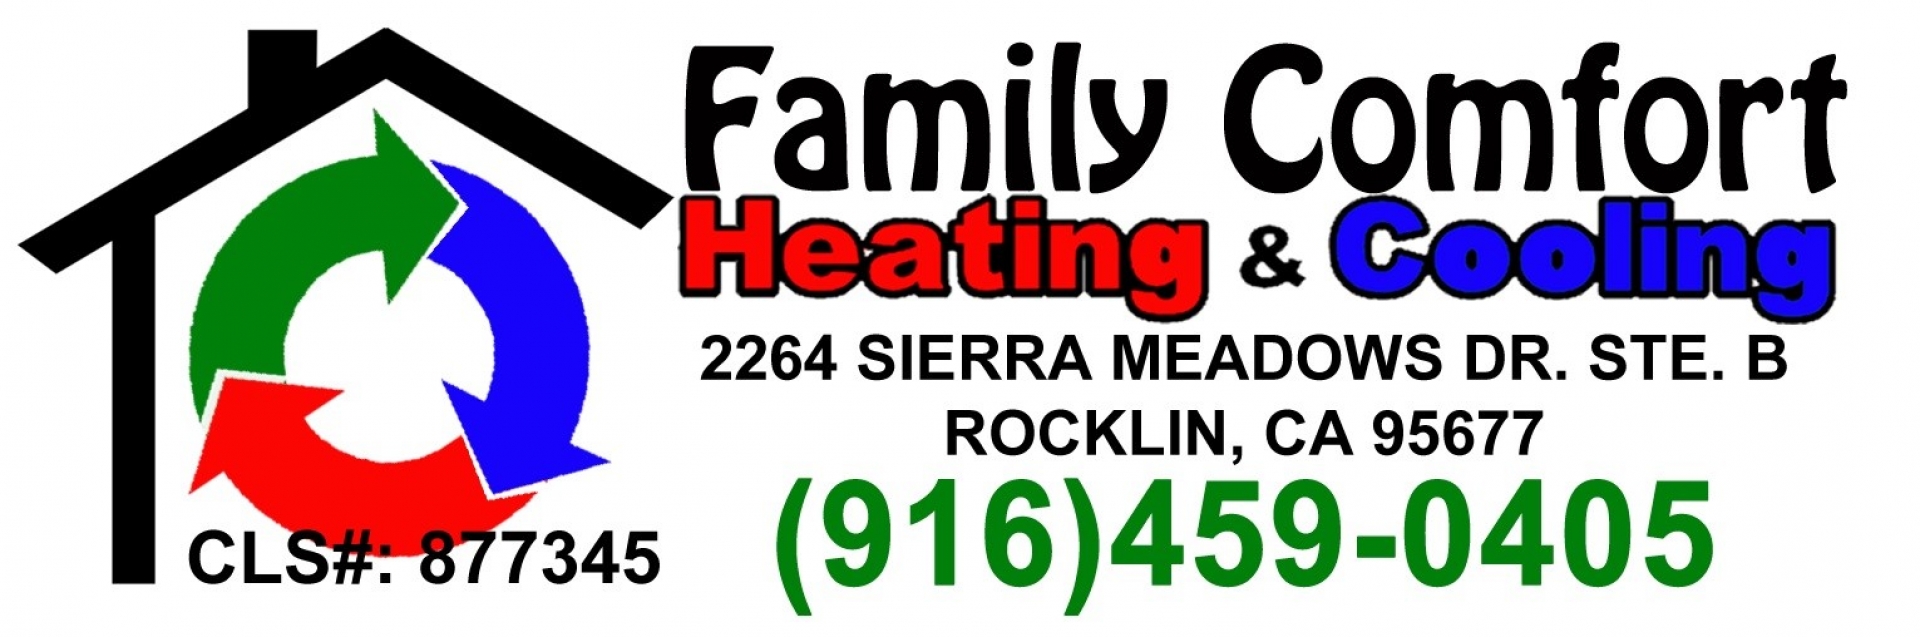 family-comfort-heating-cooling-inc-clean-energy-connection